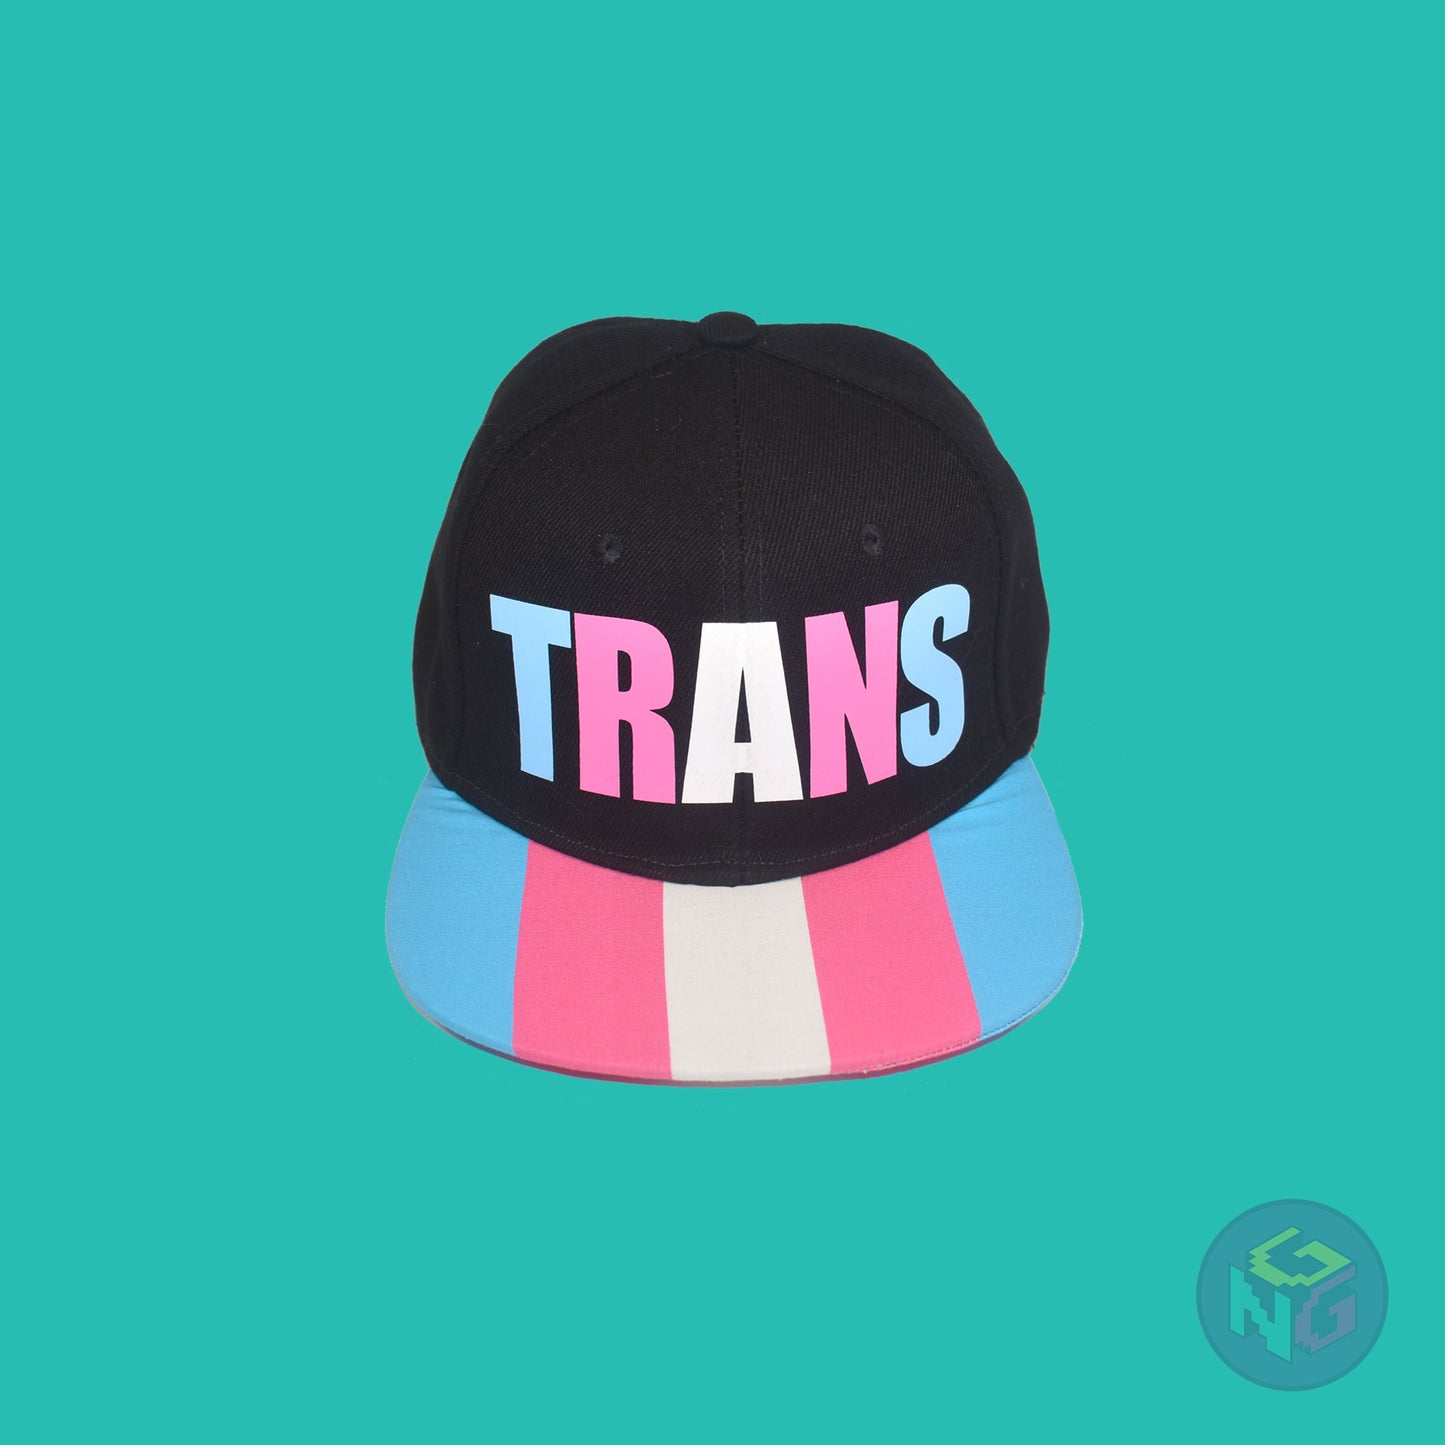 Black flat bill snapback hat. The brim has the transgender pride flag on both sides and the front of the hat has the word “TRANS” in blue, pink, and white letters. Front top view